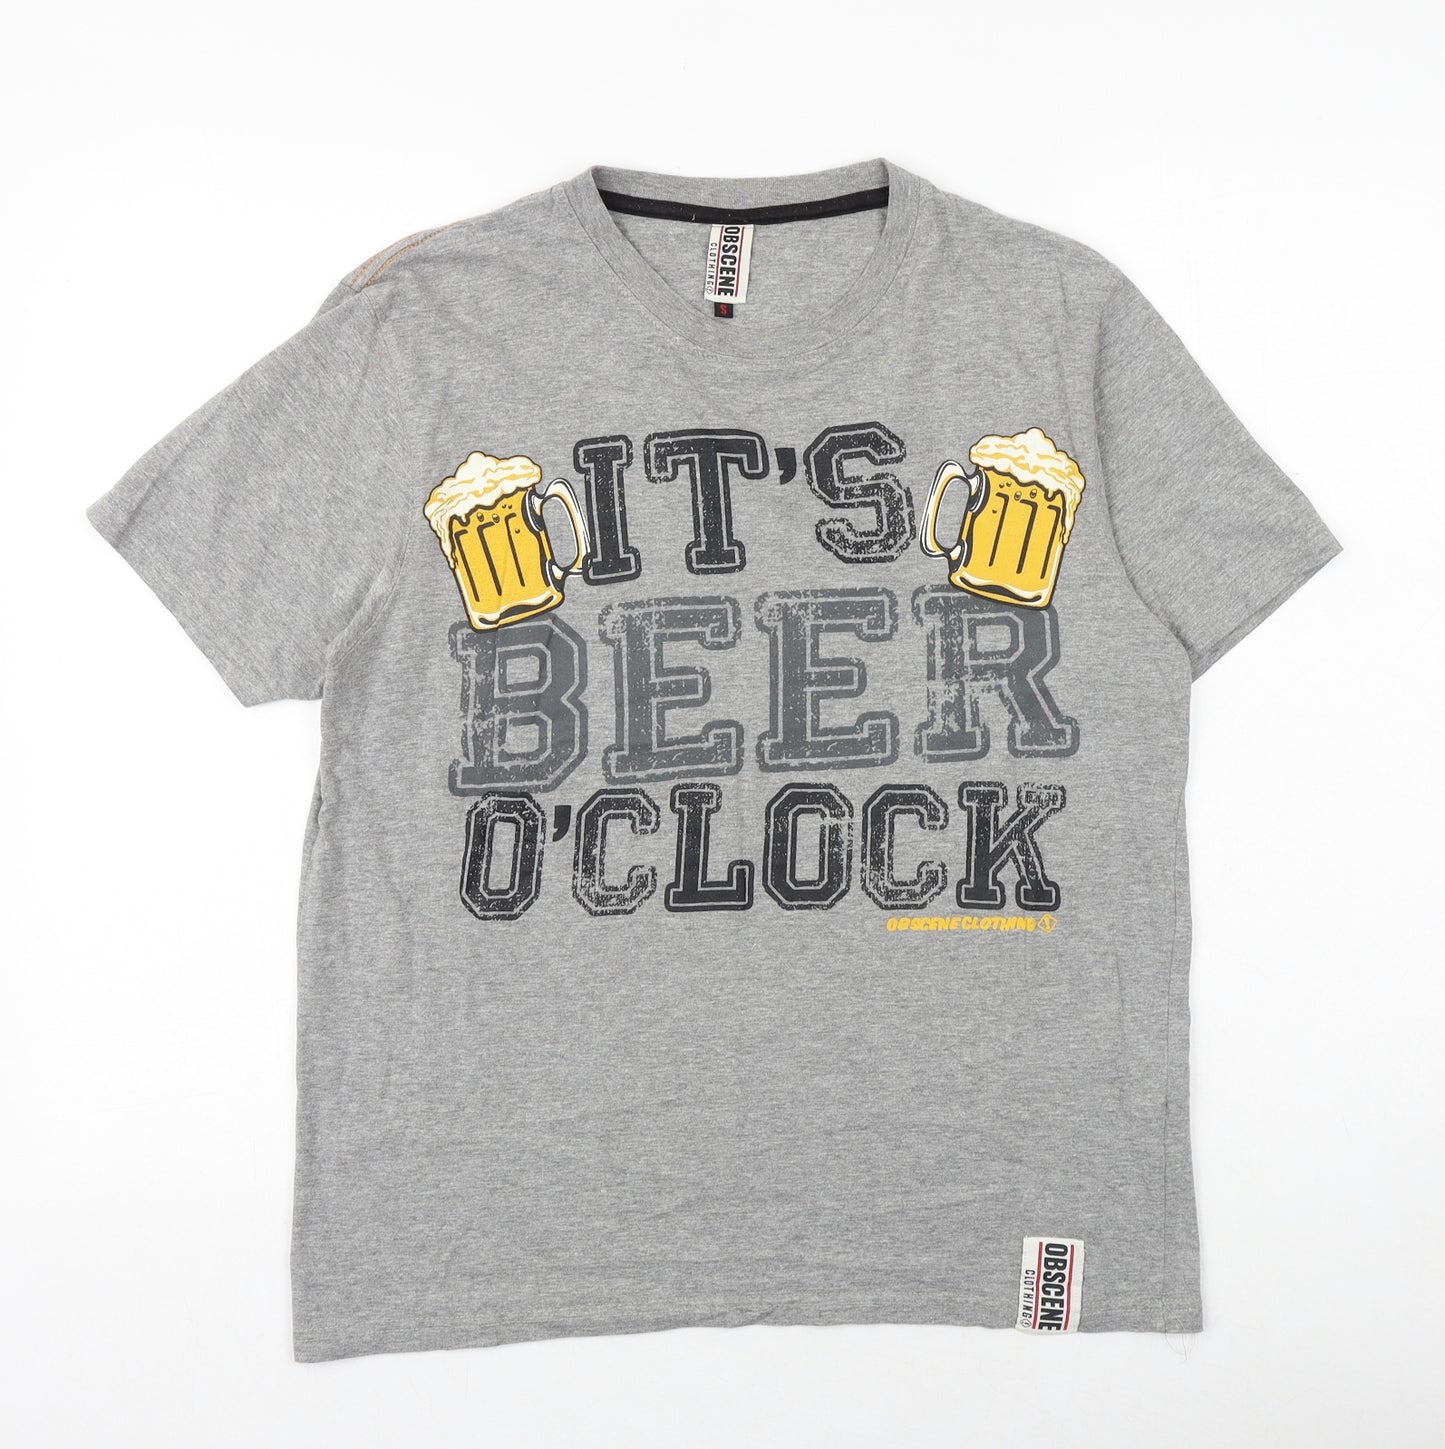 Obscene Mens Grey Cotton T-Shirt Size S Round Neck - It's Beer O'Clock